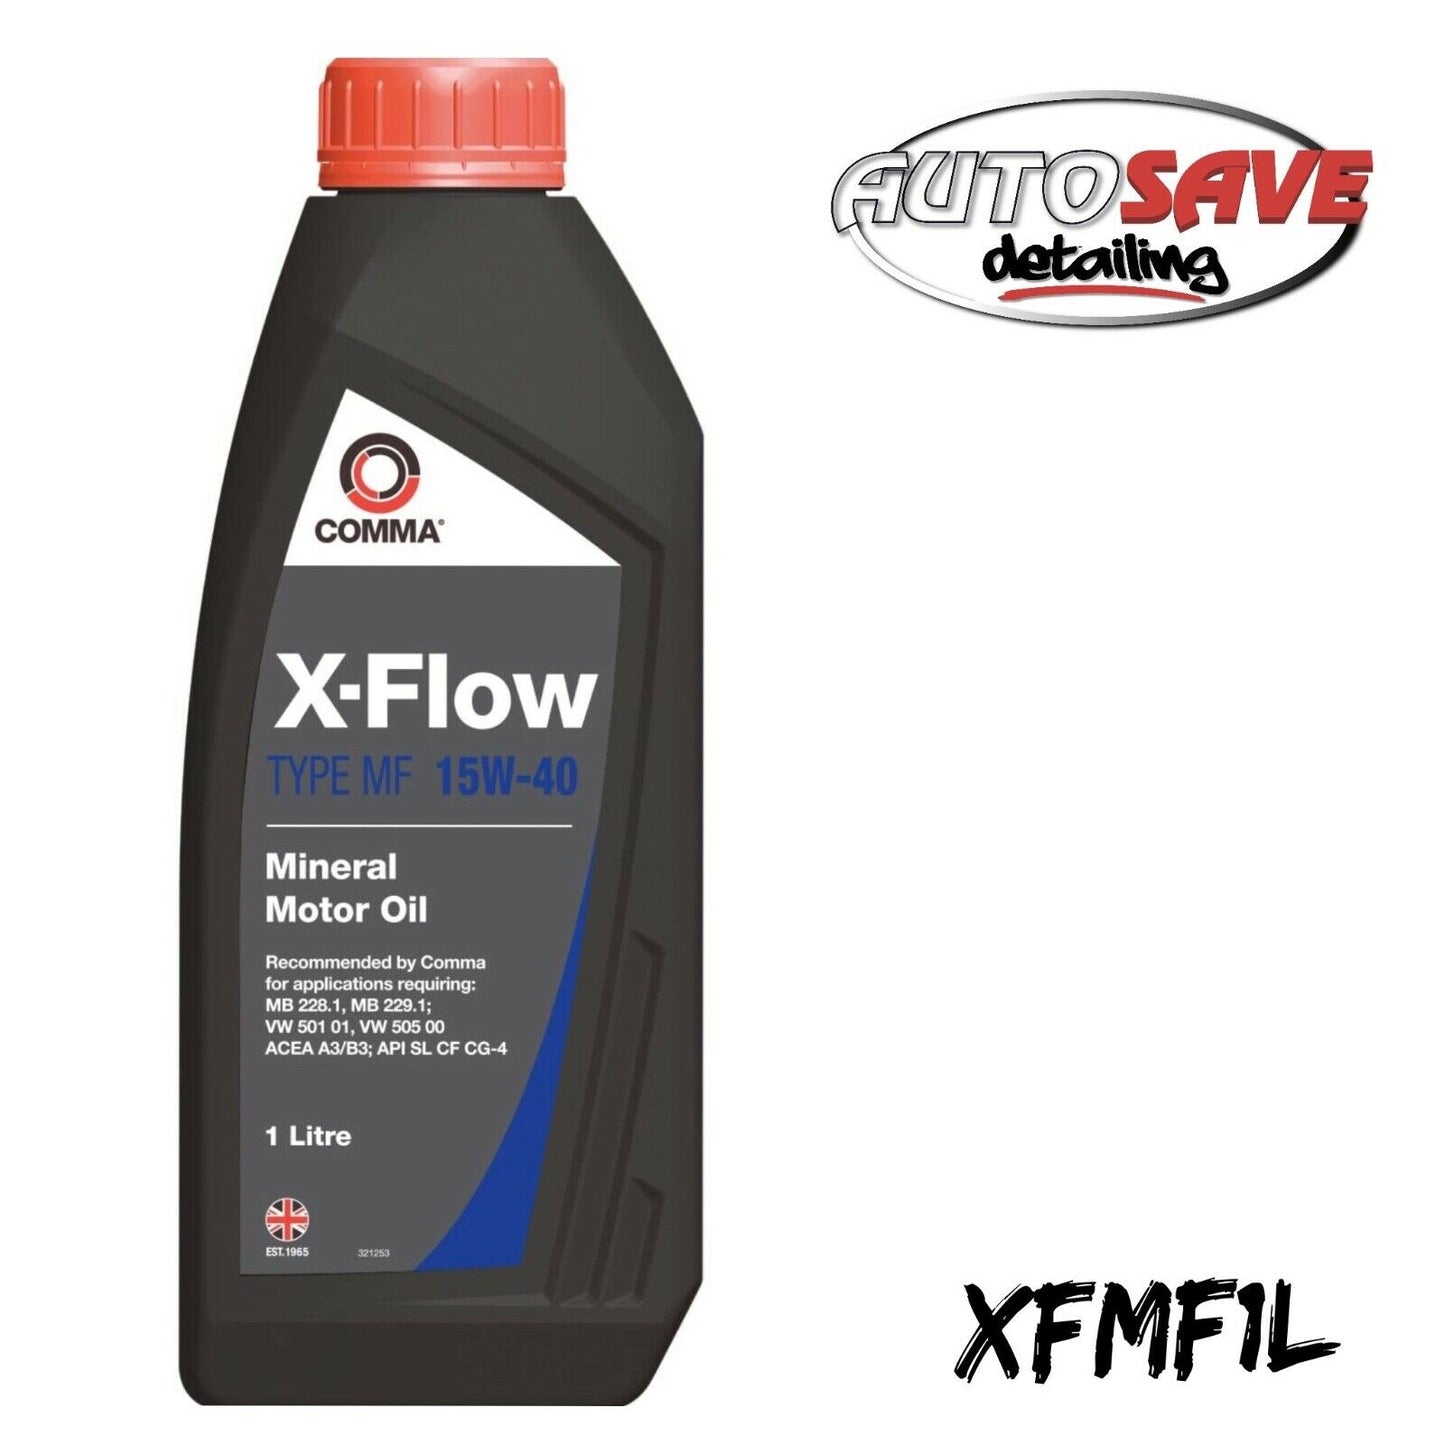 COMMA X-FLOW TYPE MF 15W-40 MINERAL ENGINE OIL FOR PETROL & DIESEL VEHICLES